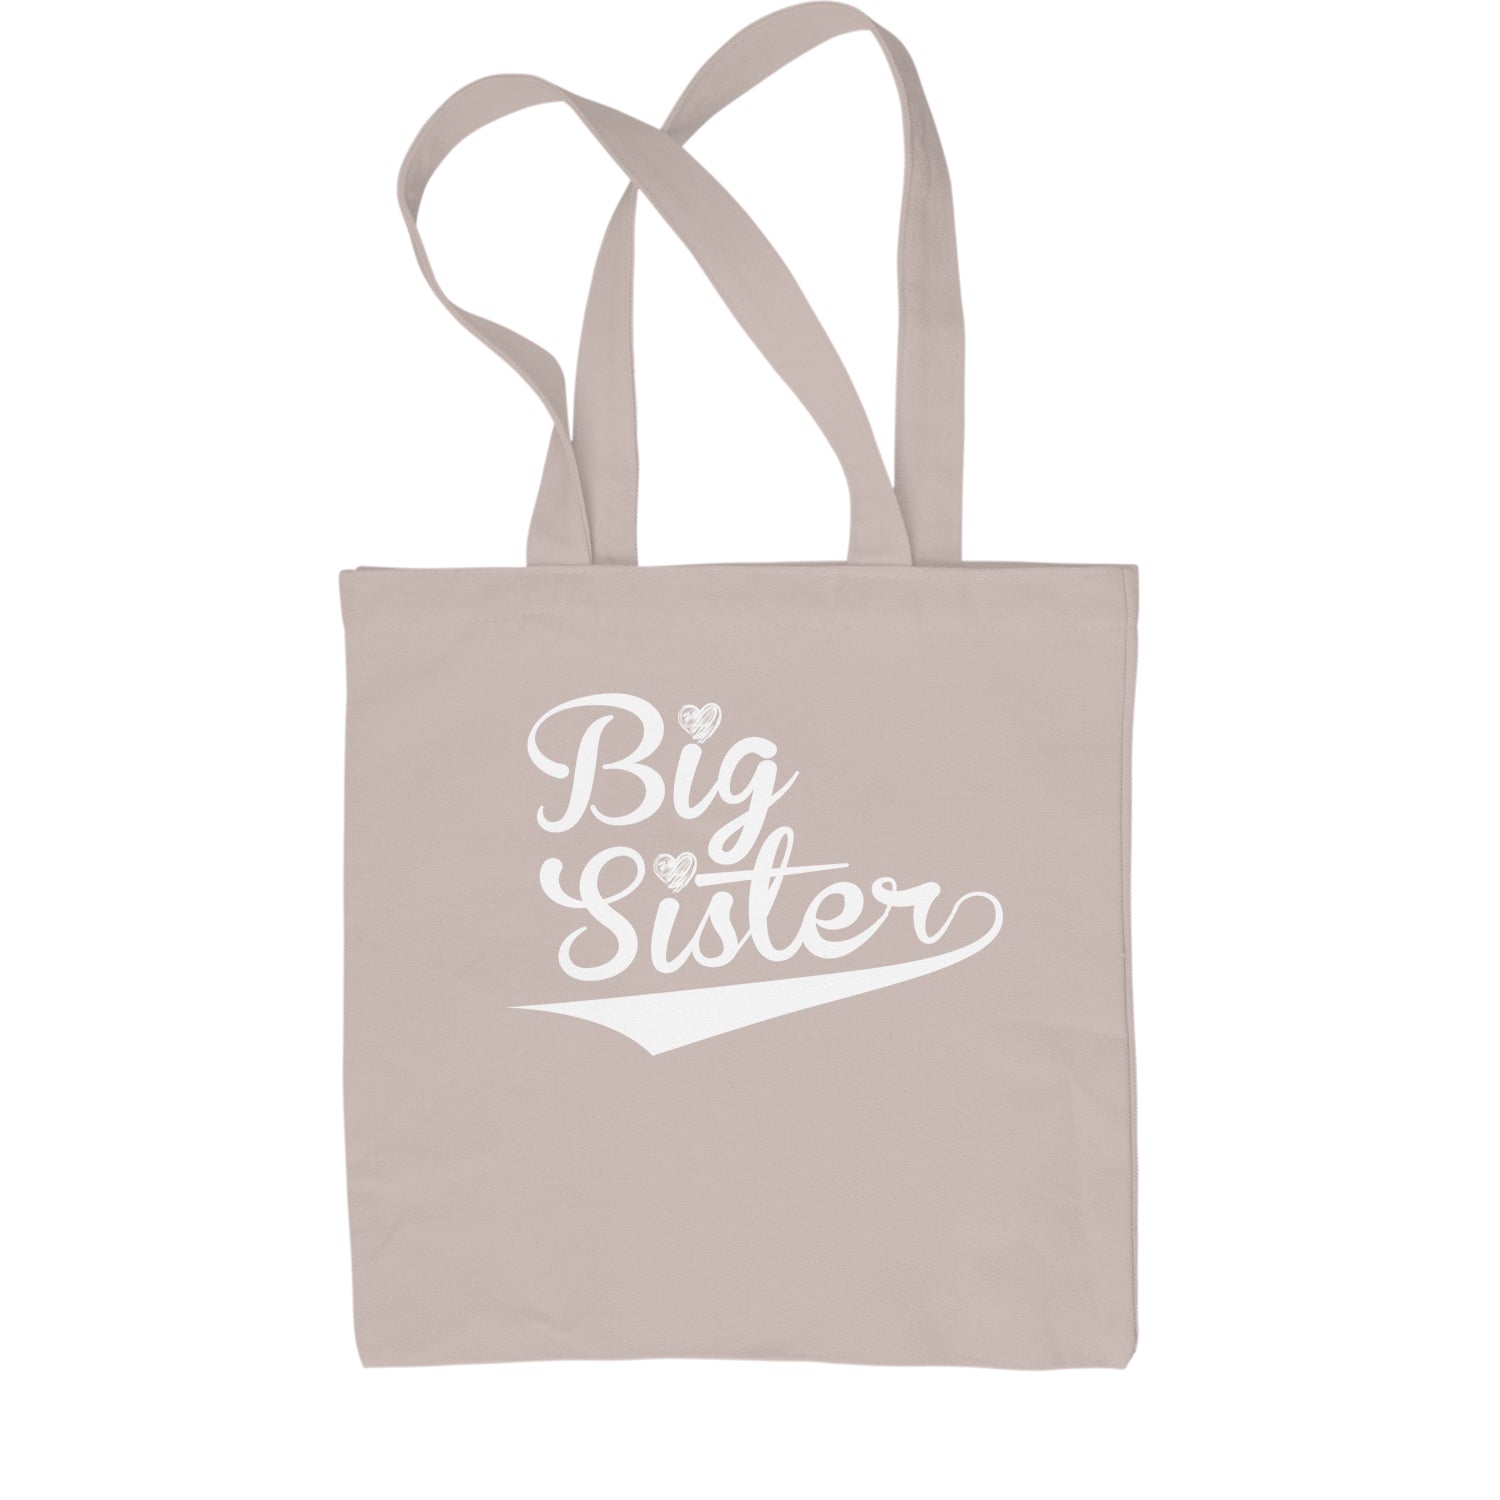 Big Sister Sibling Shopping Tote Bag announcement, big, brother, family, little, rivalry, sibling, sister by Expression Tees